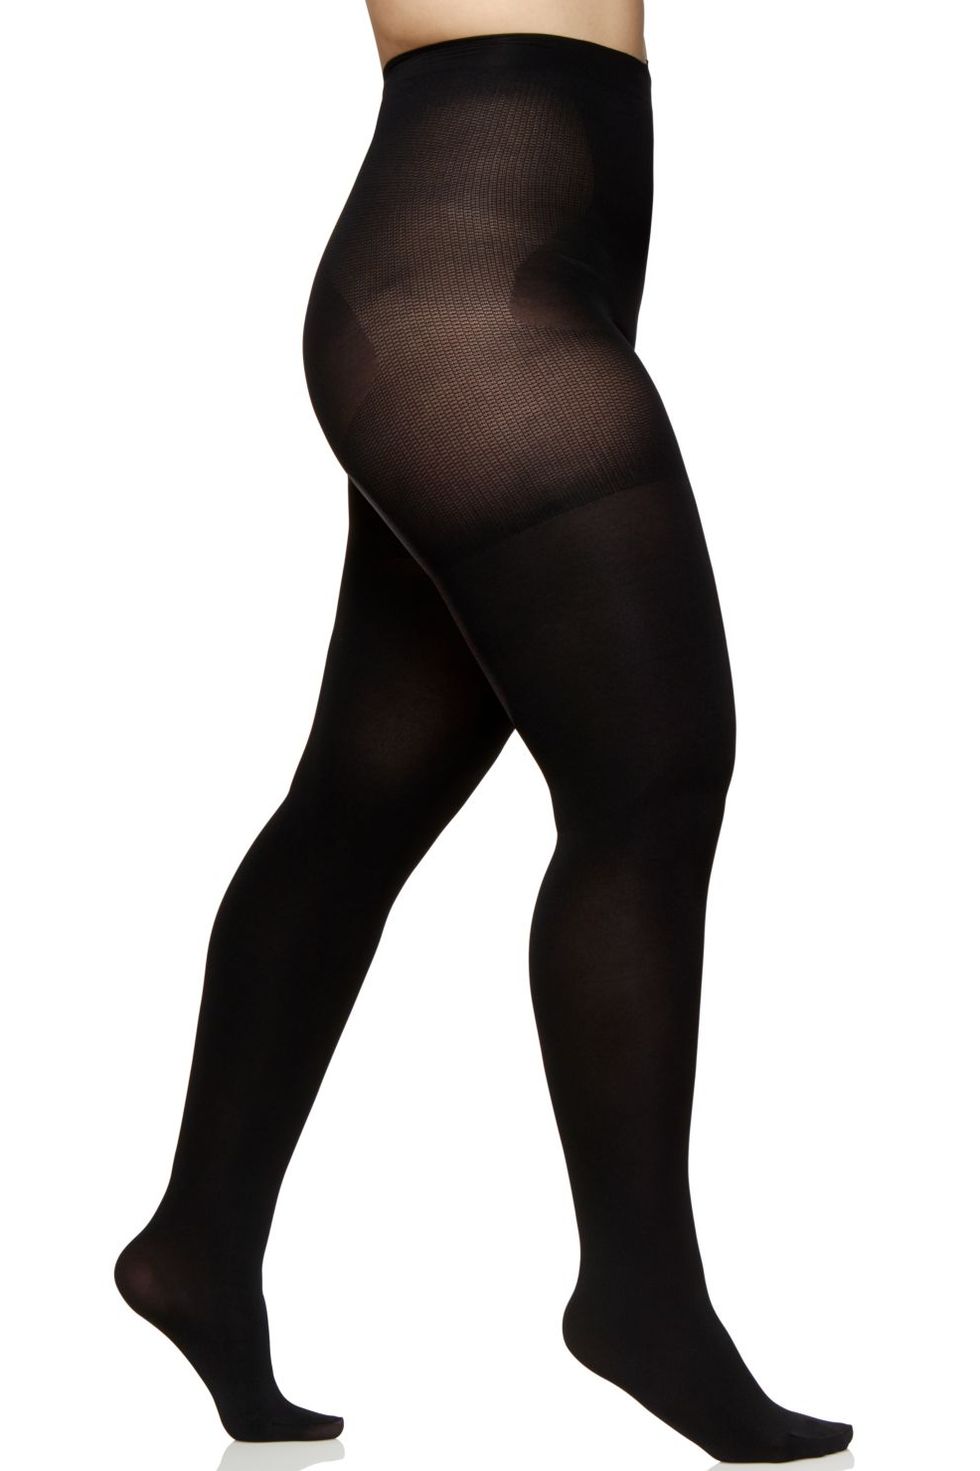 Plus Size Durable Fishnet Stockings, Black High Waisted Fishnets Tights for  Women - Silky Toes